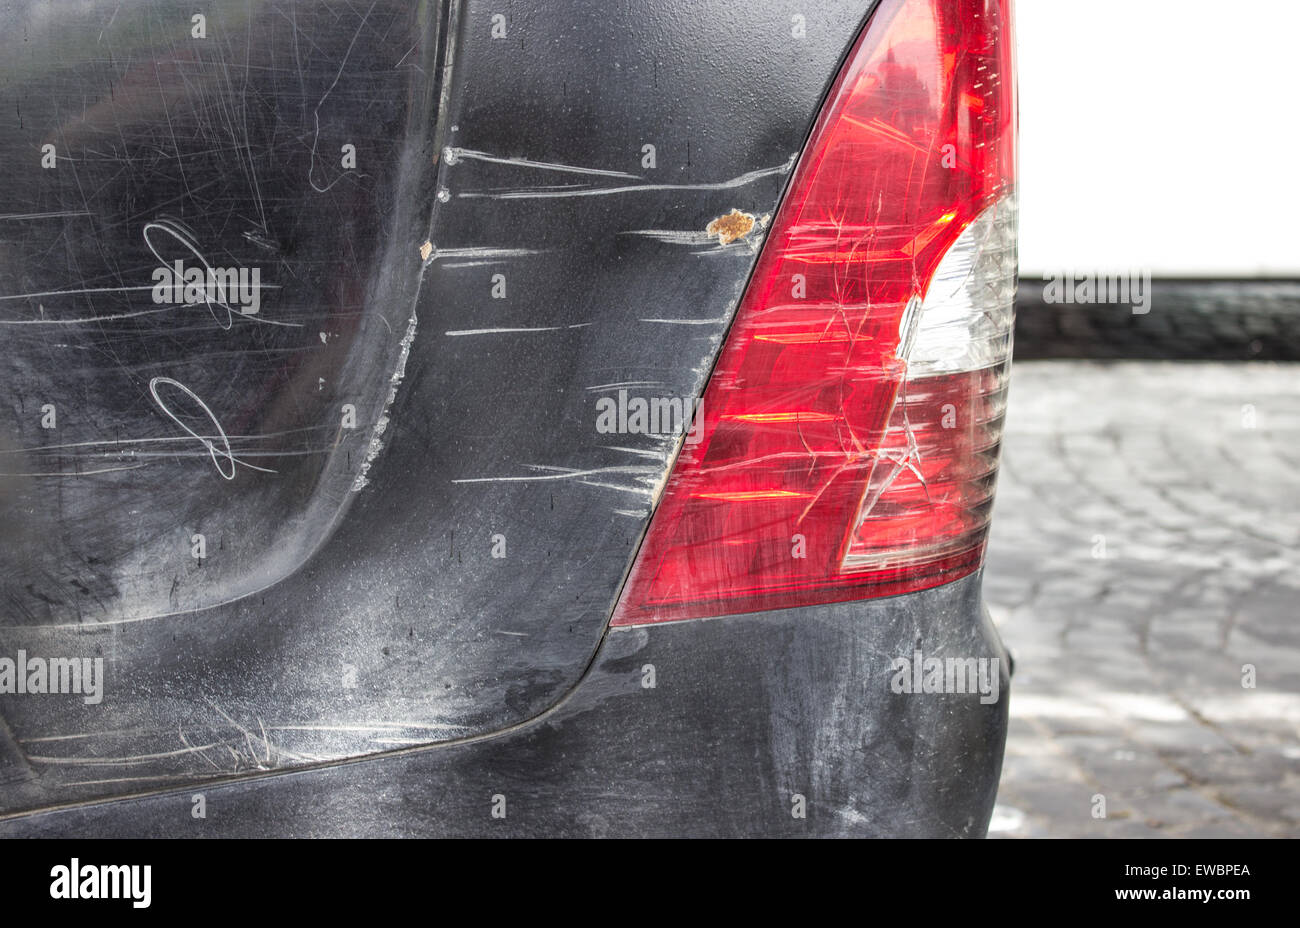 Scratches on the rear of a car Stock Photo